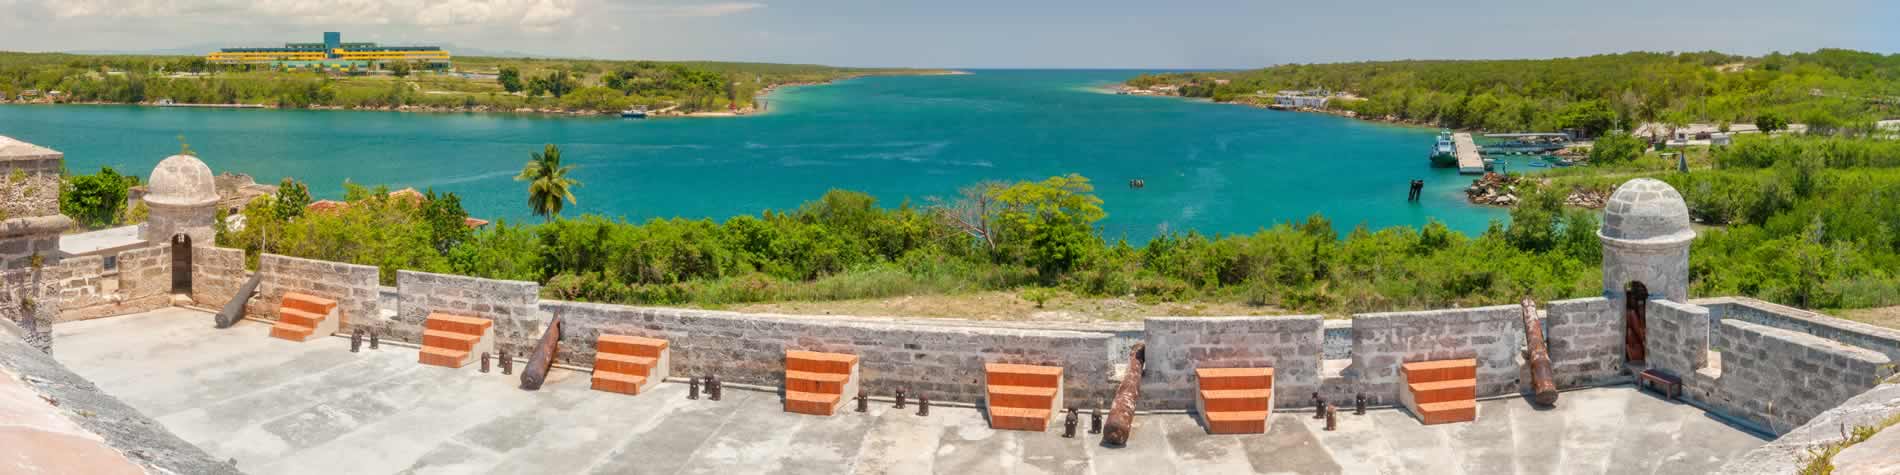 View from the Jagua fortress to the caribbean sea